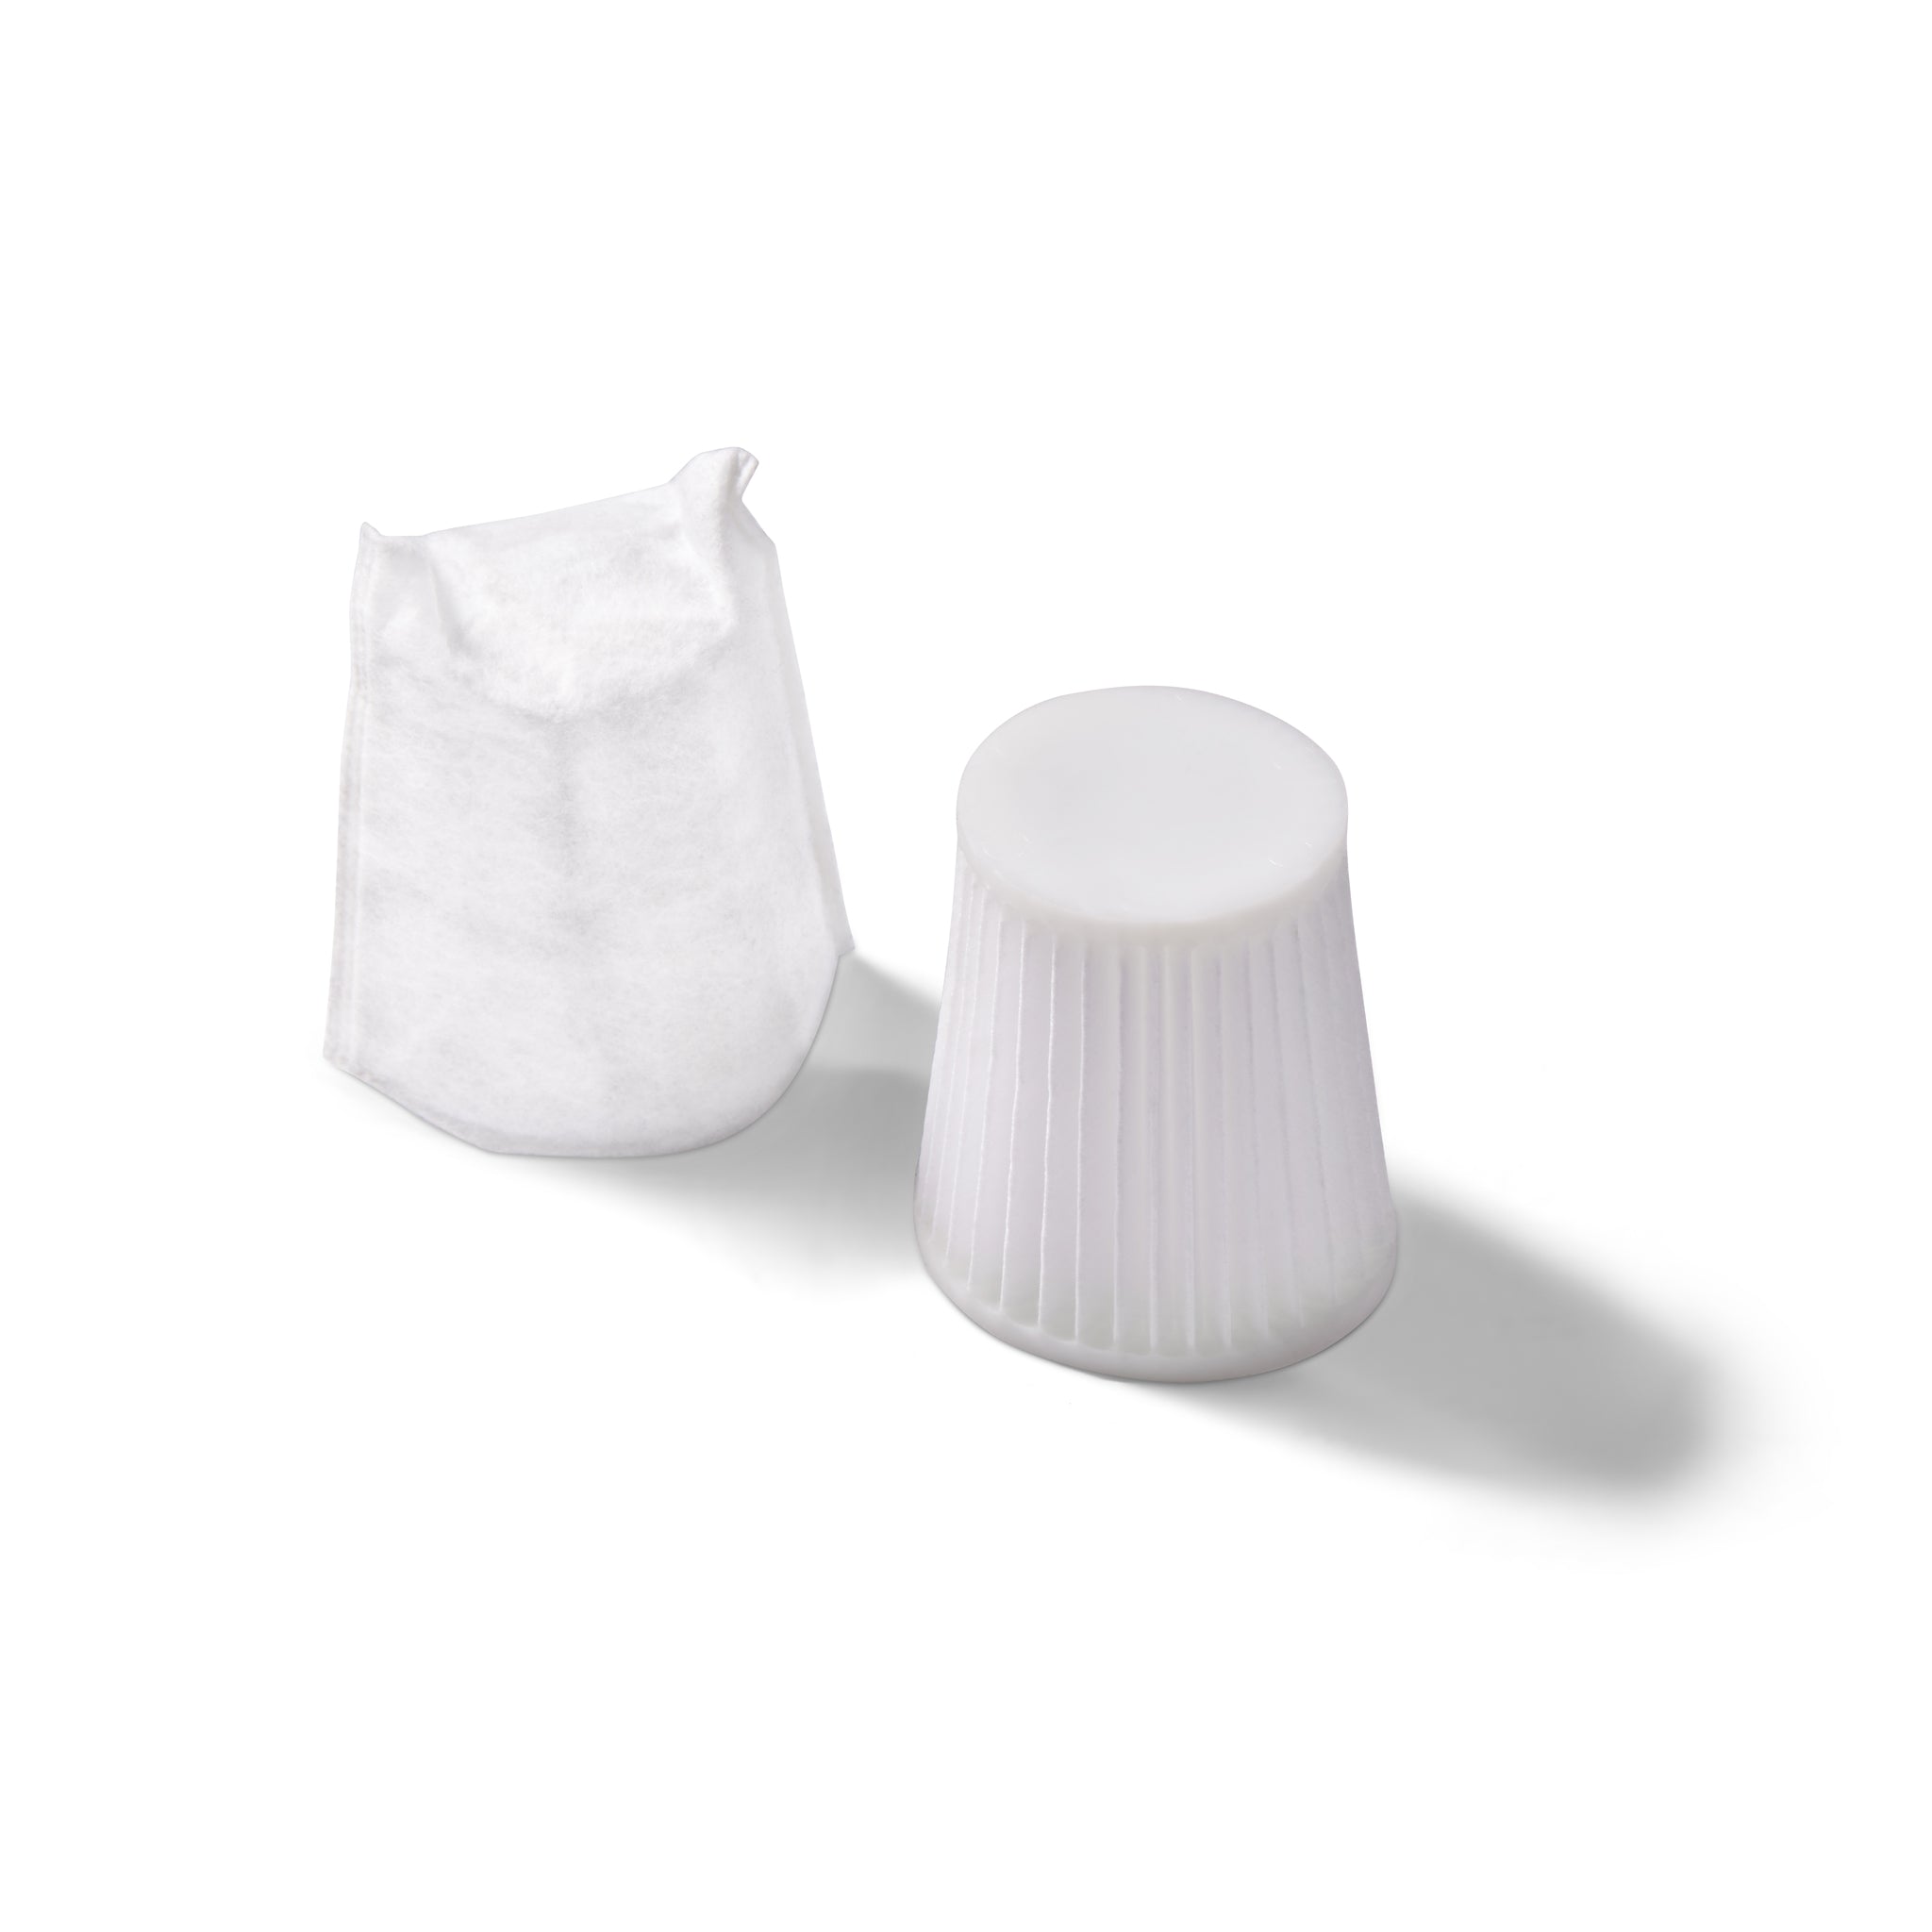 Filters for Cordless 18V Vacuum - Set of 2